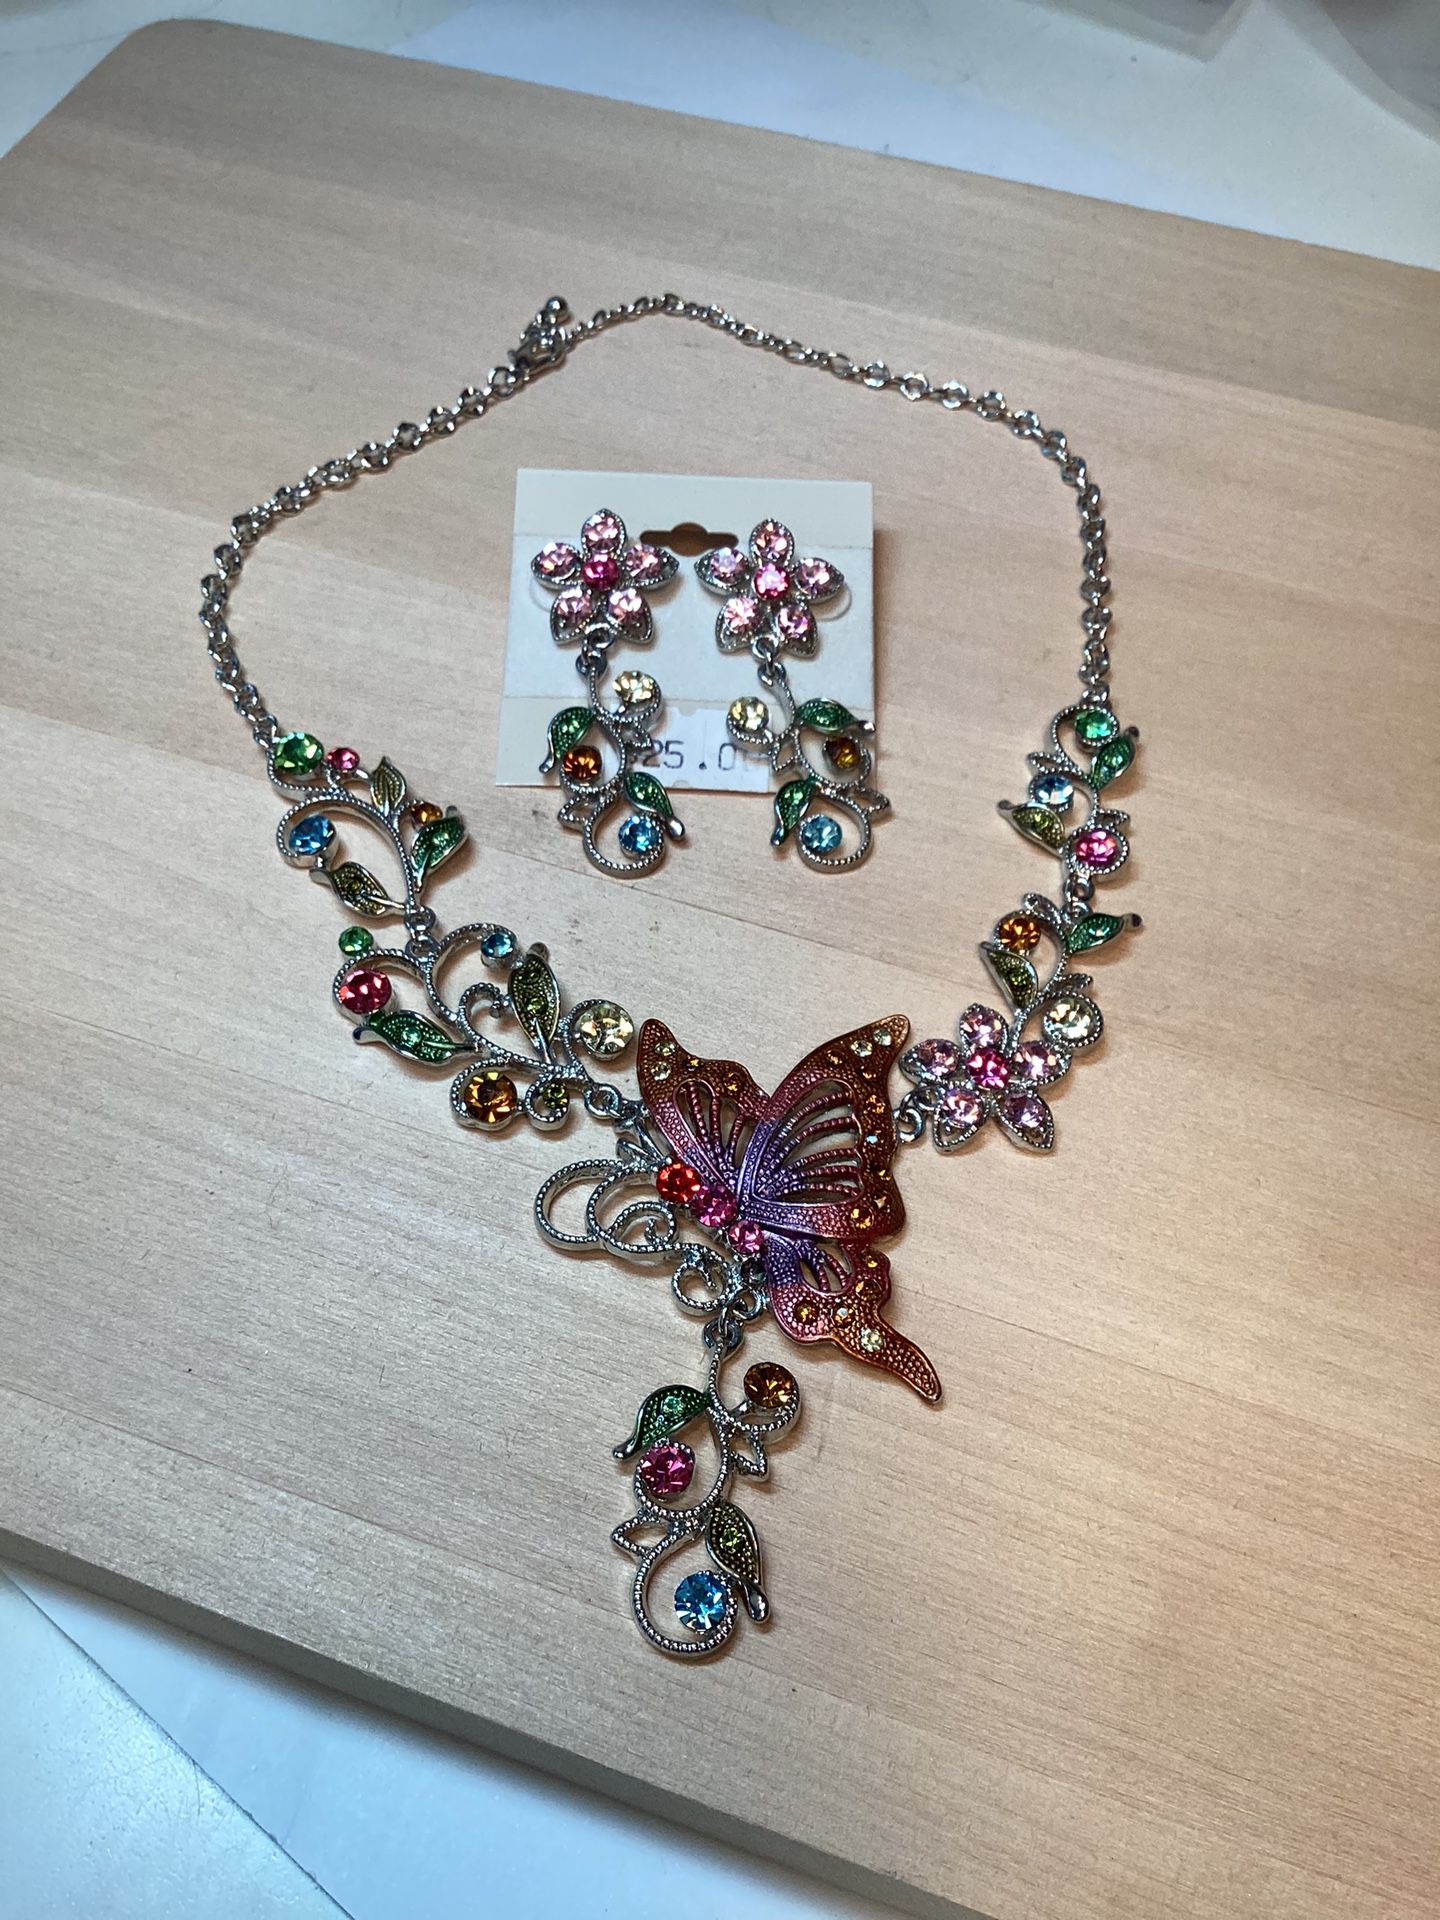 Stunning  Fairyland Sparkly Rhinestone Necklace With Earrings